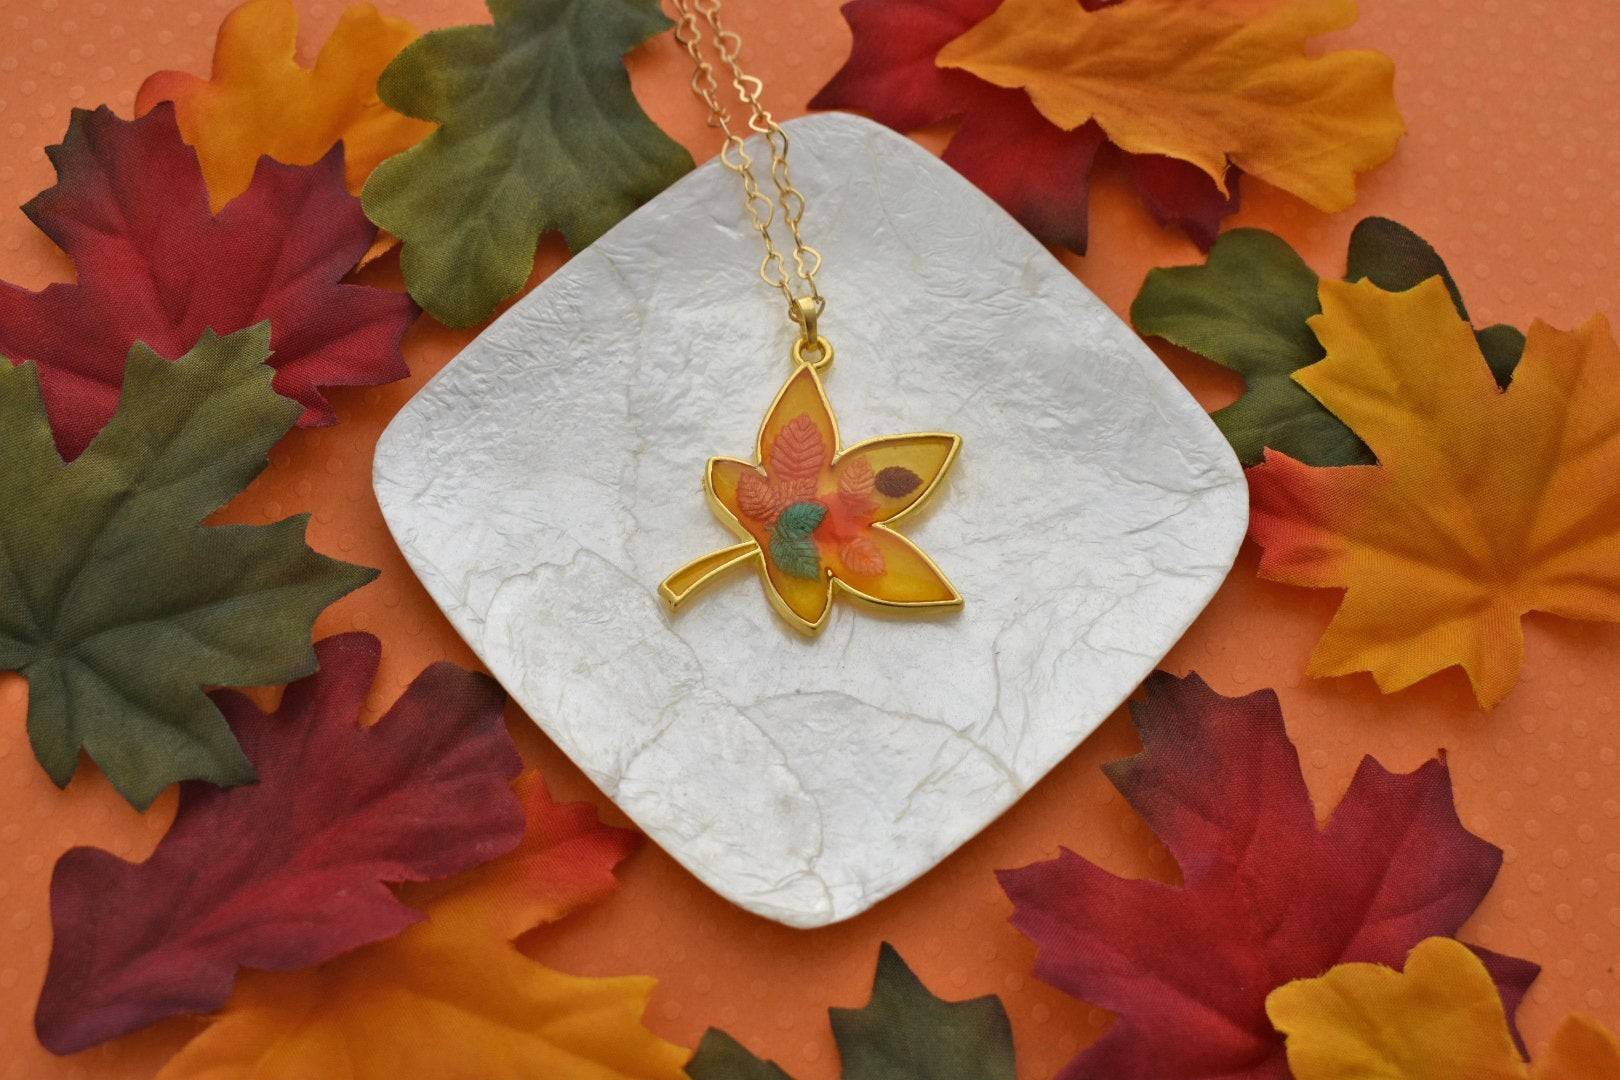 rad jewelry + home goods @UNRULEDclub » the autumn leaves necklace